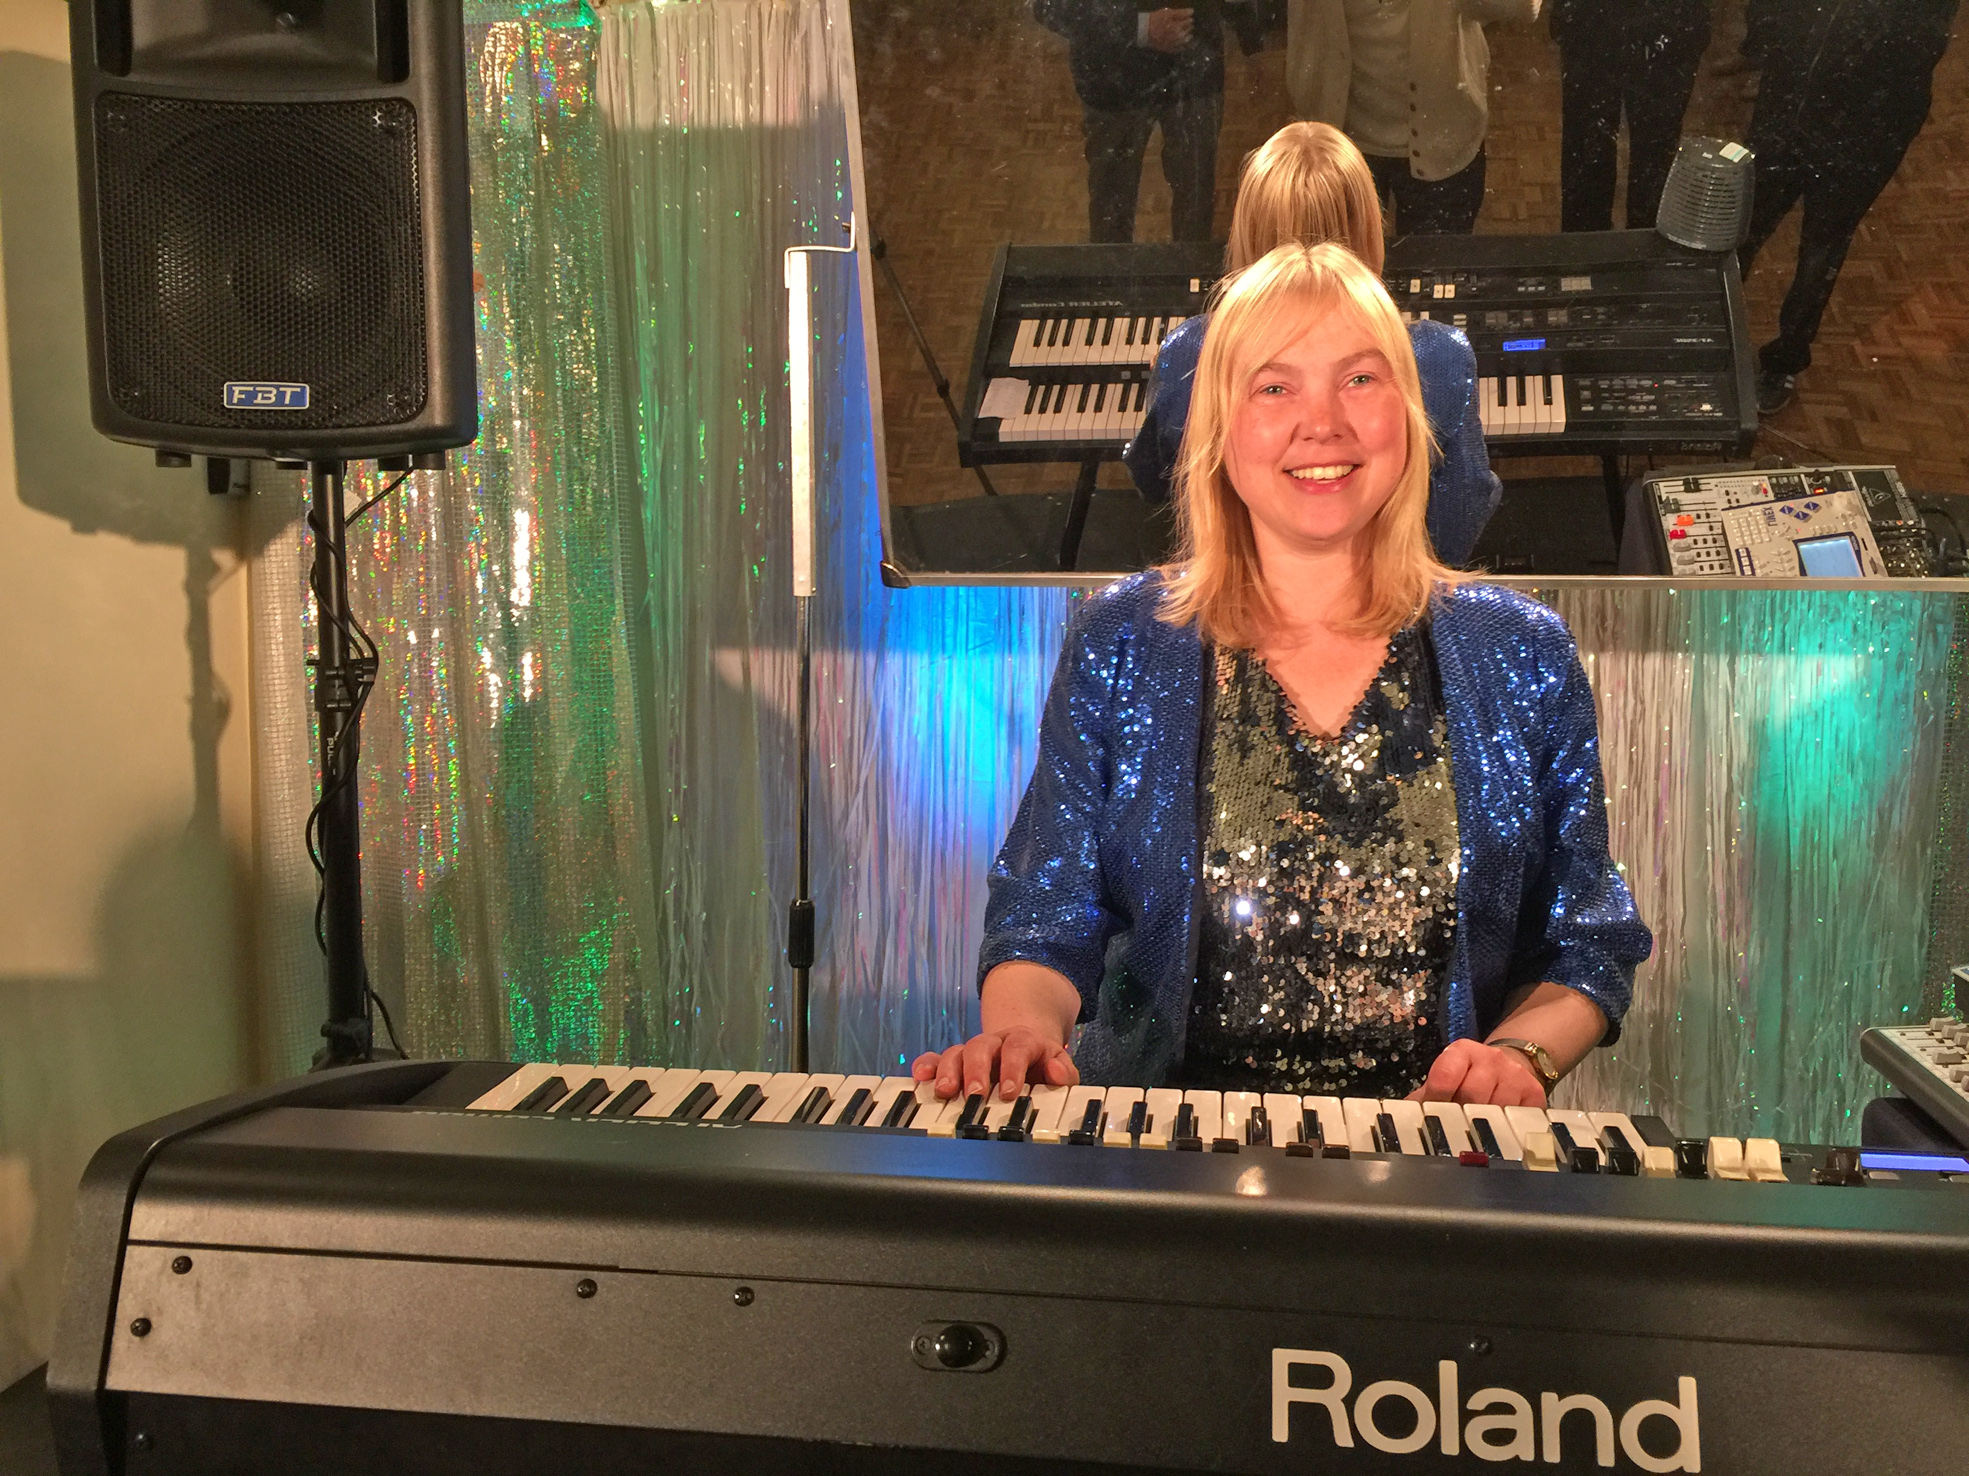 Organist Elizabeth Harrison sits behind an electronic keyboard in a glittery blue top, with blonde hair